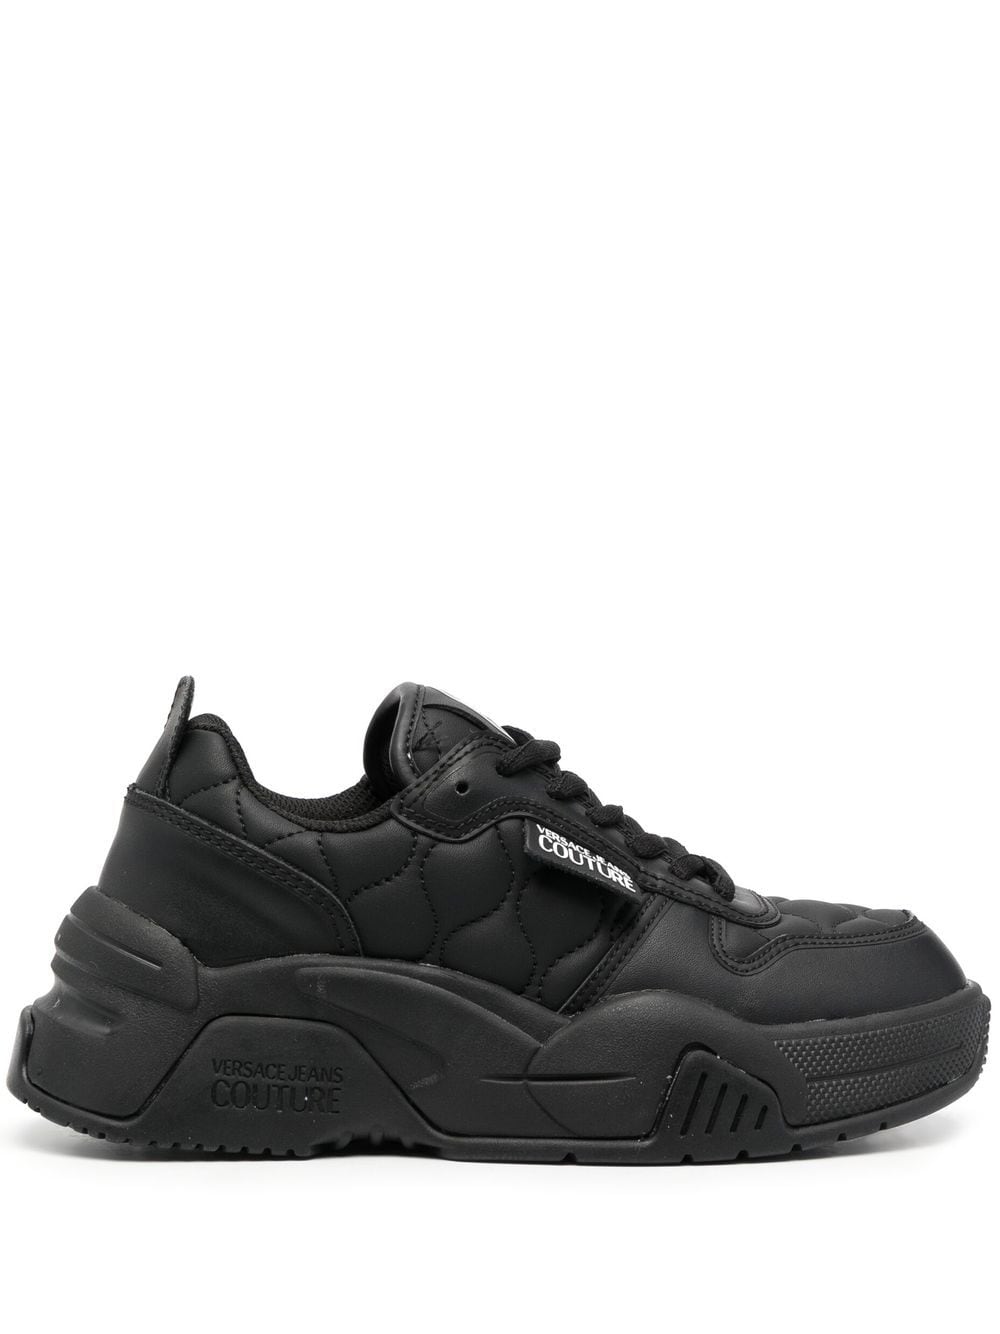 Versace Jeans Couture quilted chunky sneakers - Black von Versace Jeans Couture